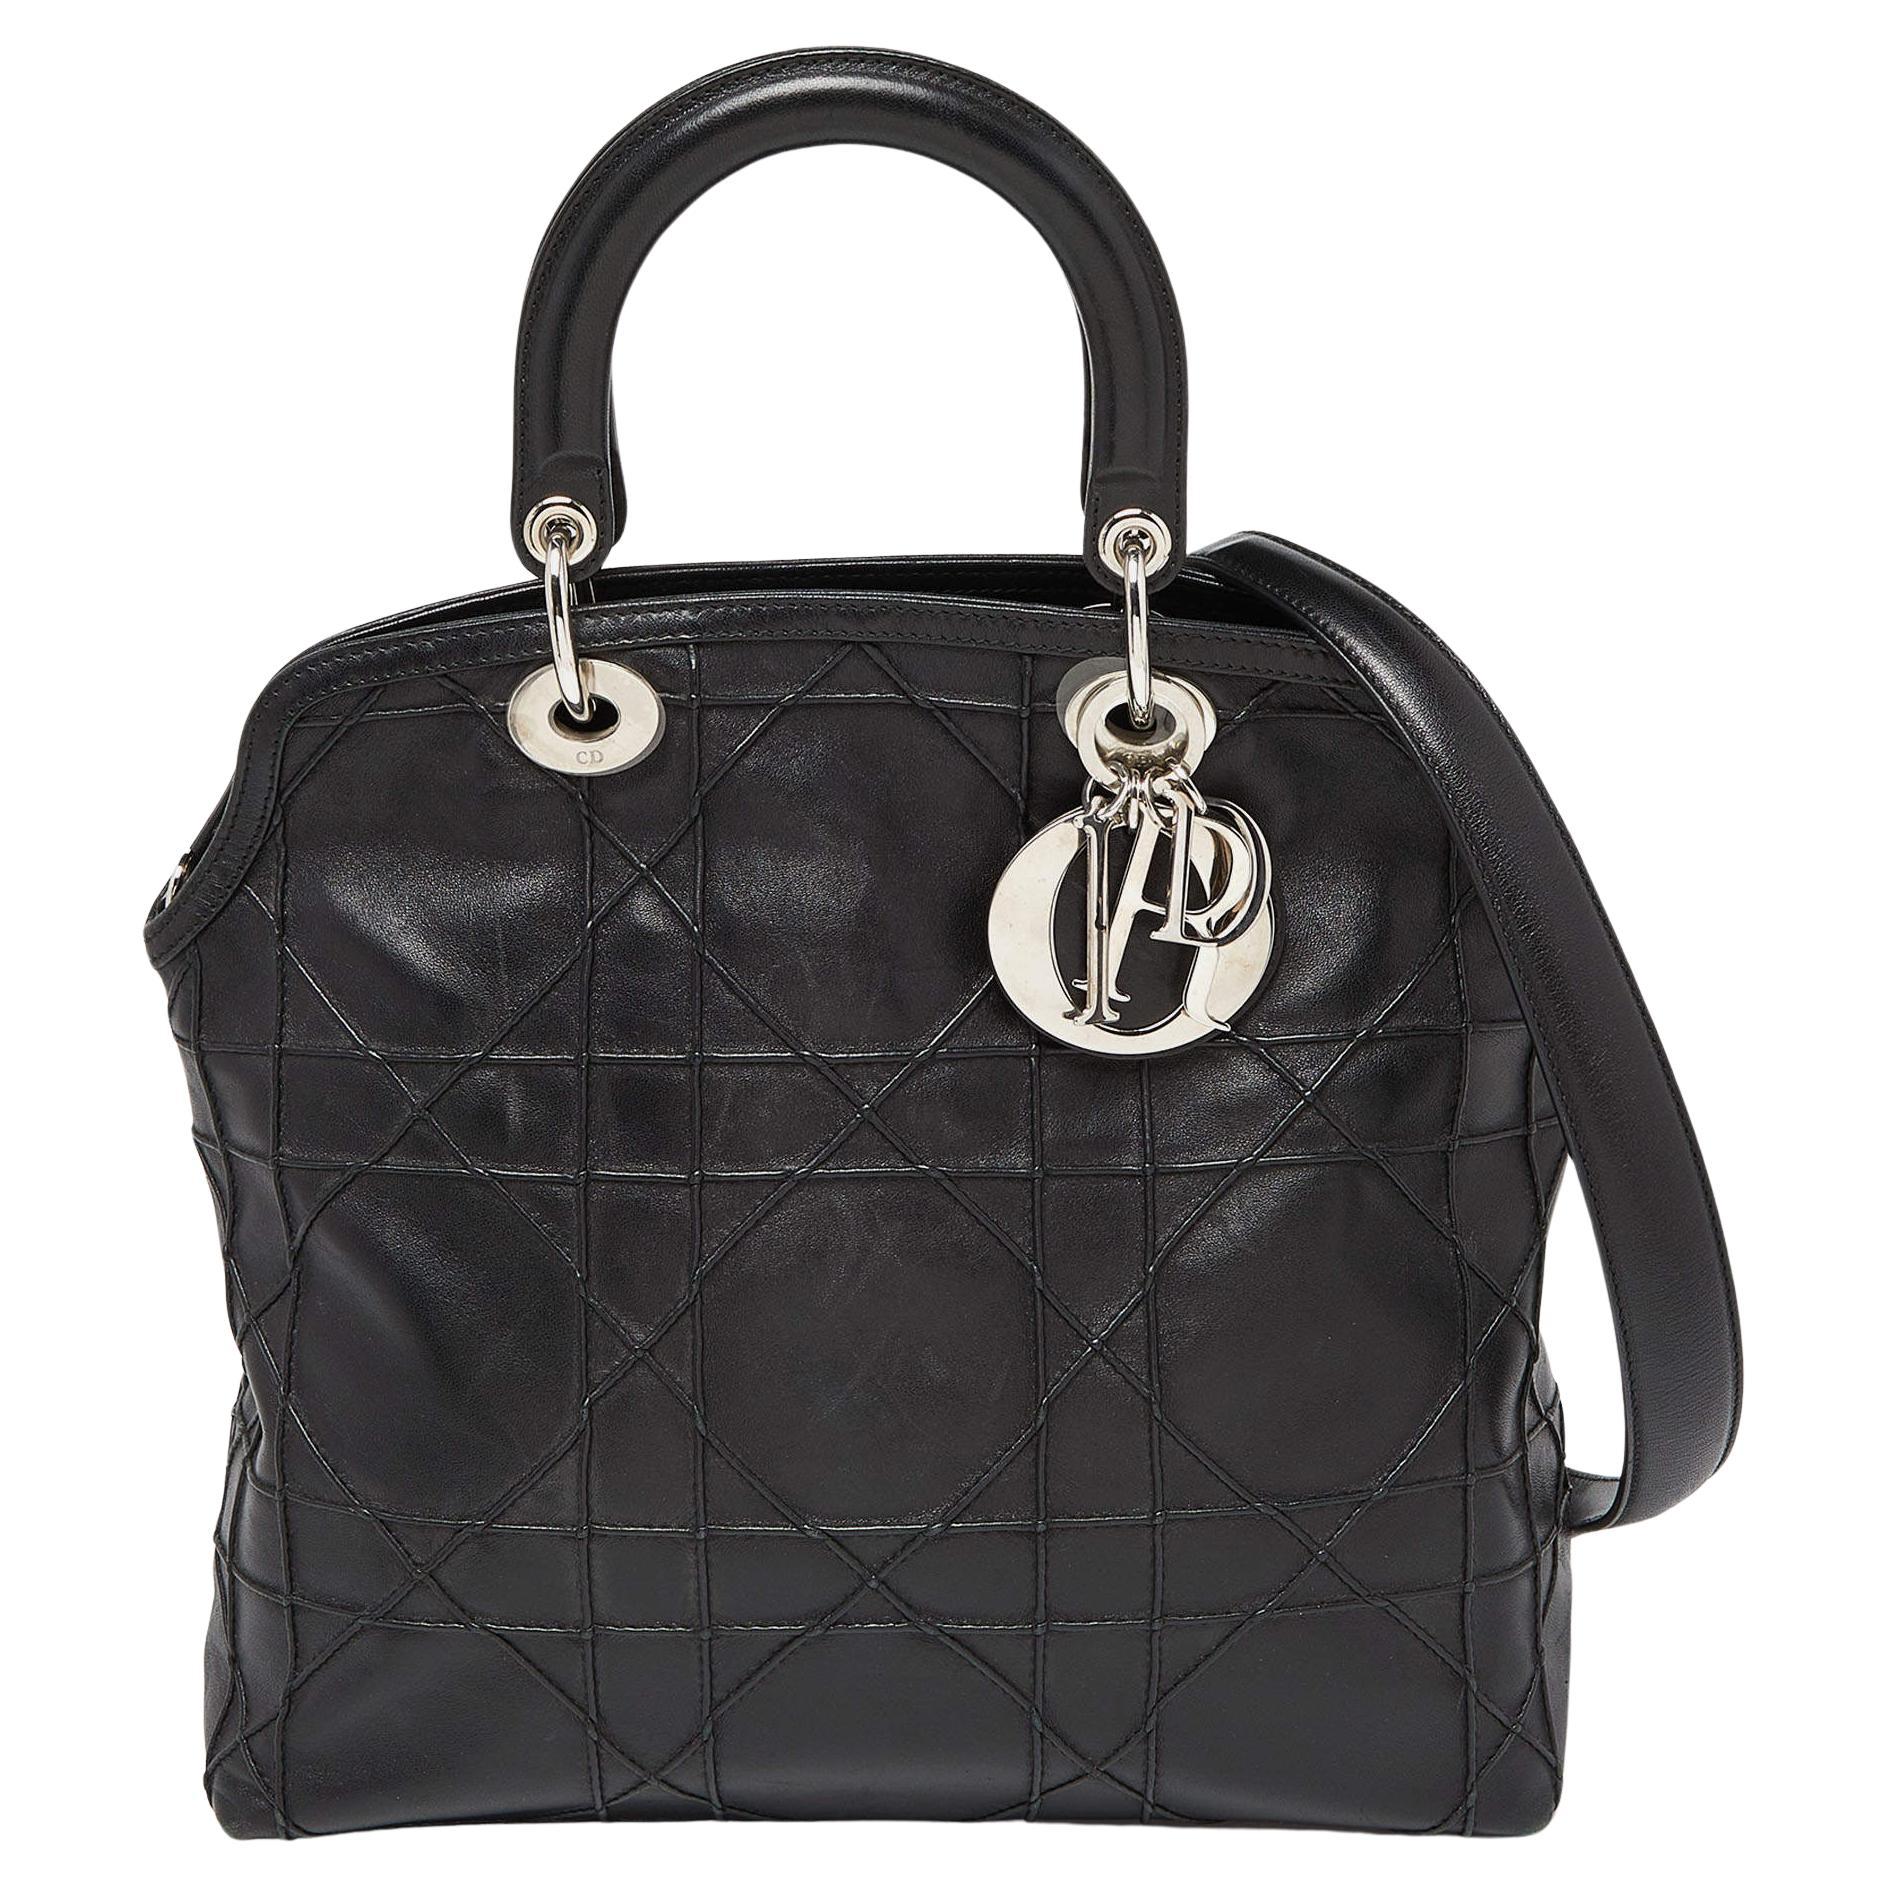 Dior Black Cannage Leather Granville Tote